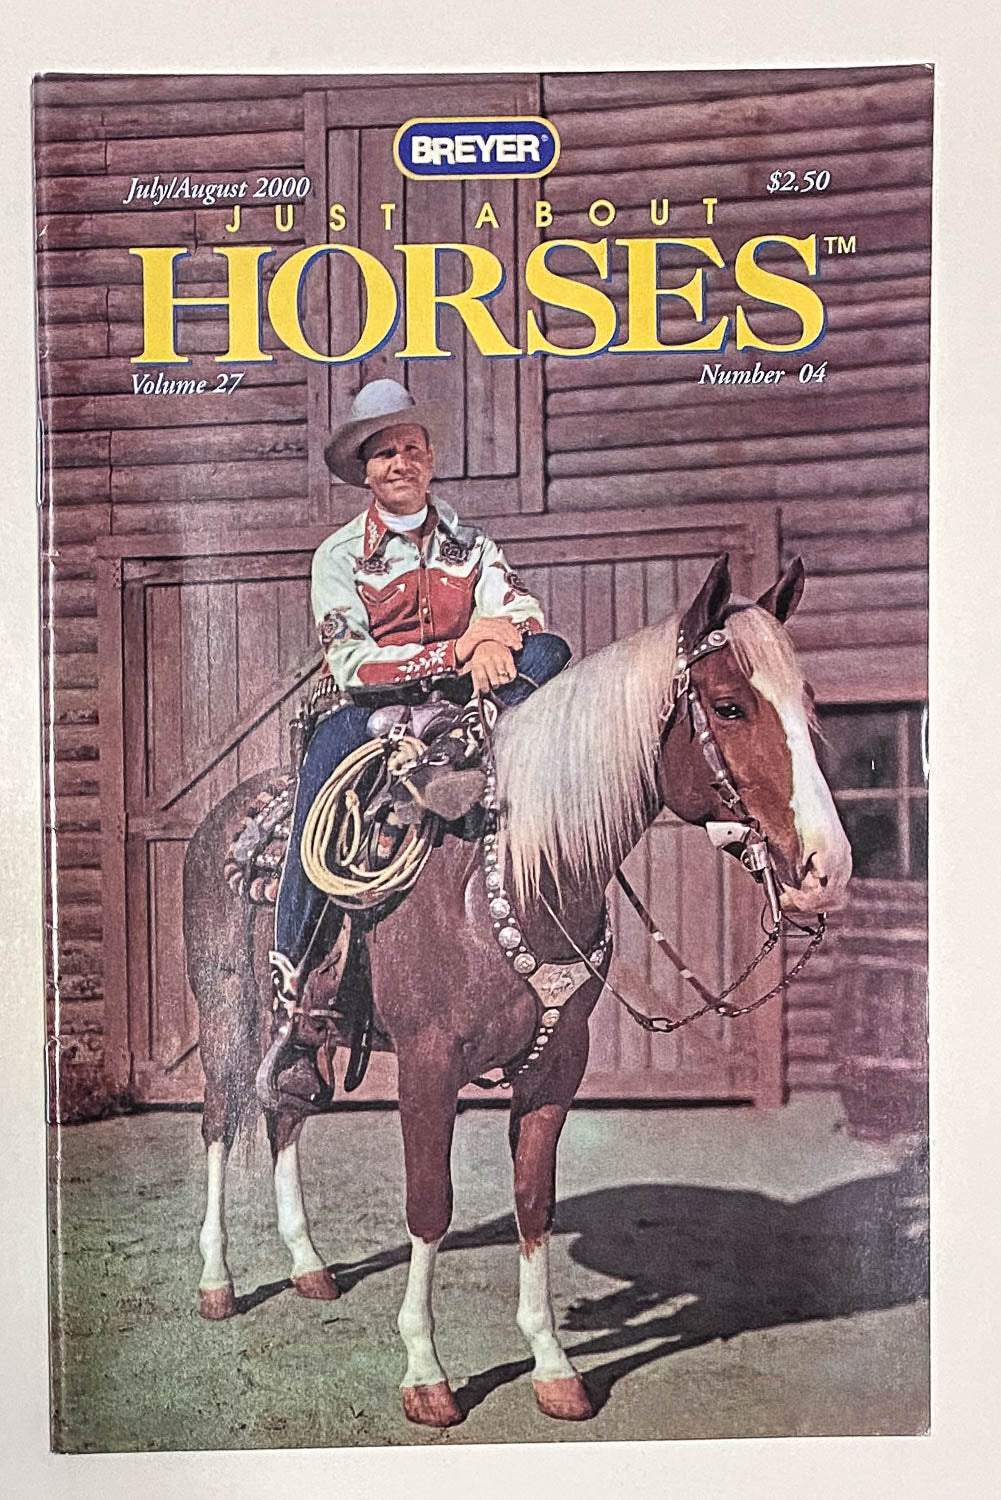 Just About Horses Magazine Vol. 27, No. 4, 2000 July/Aug